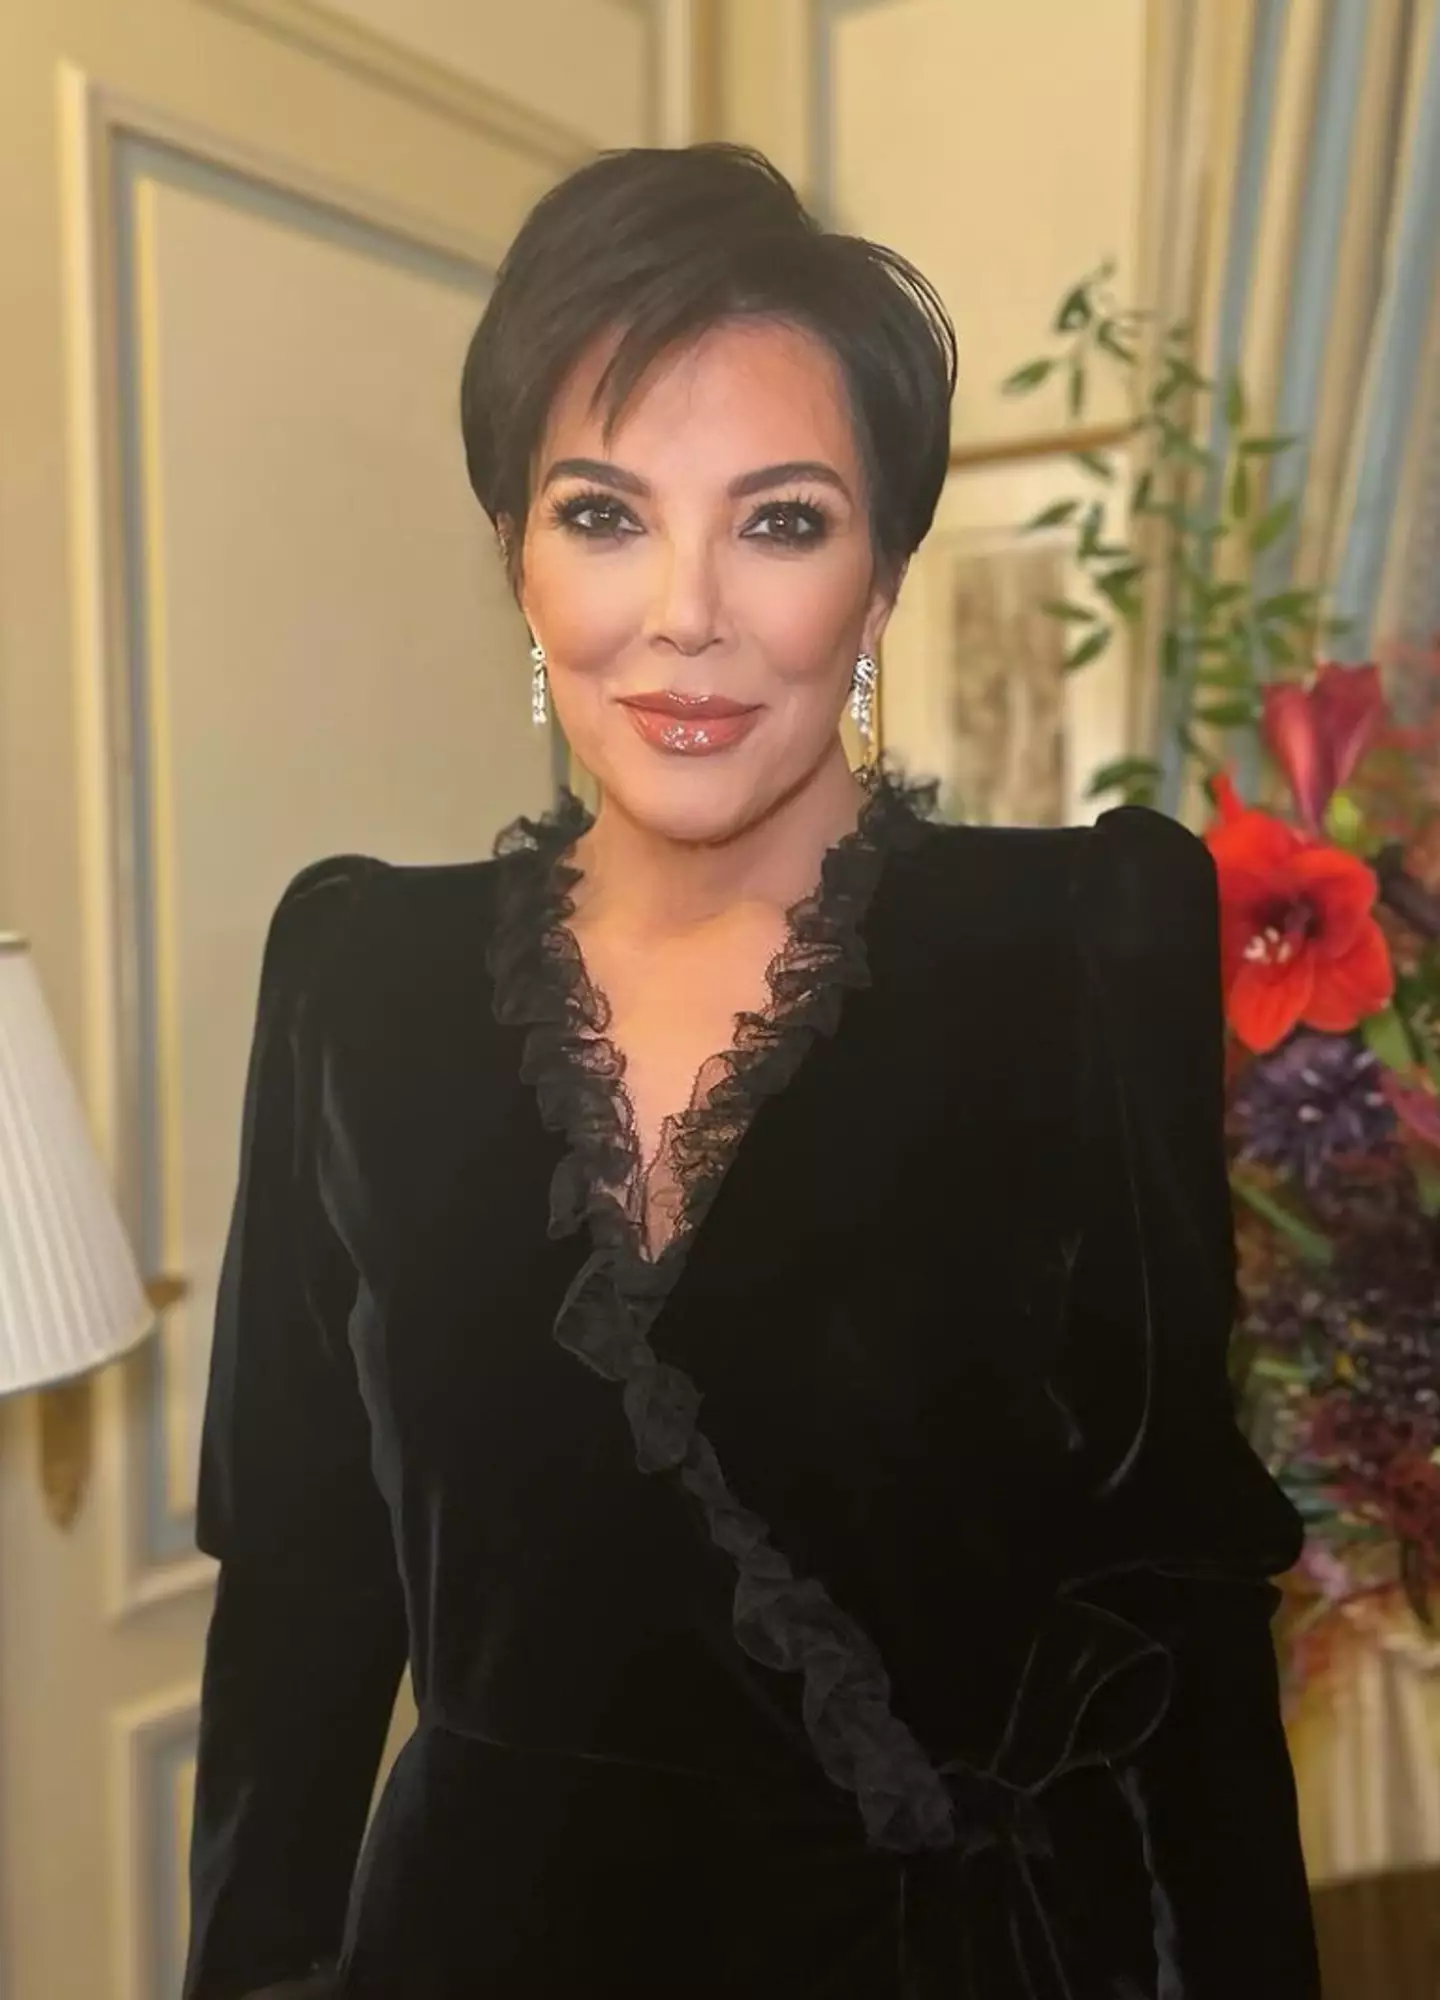 Kris Jenner opened up about how she handles 'bullies' online.